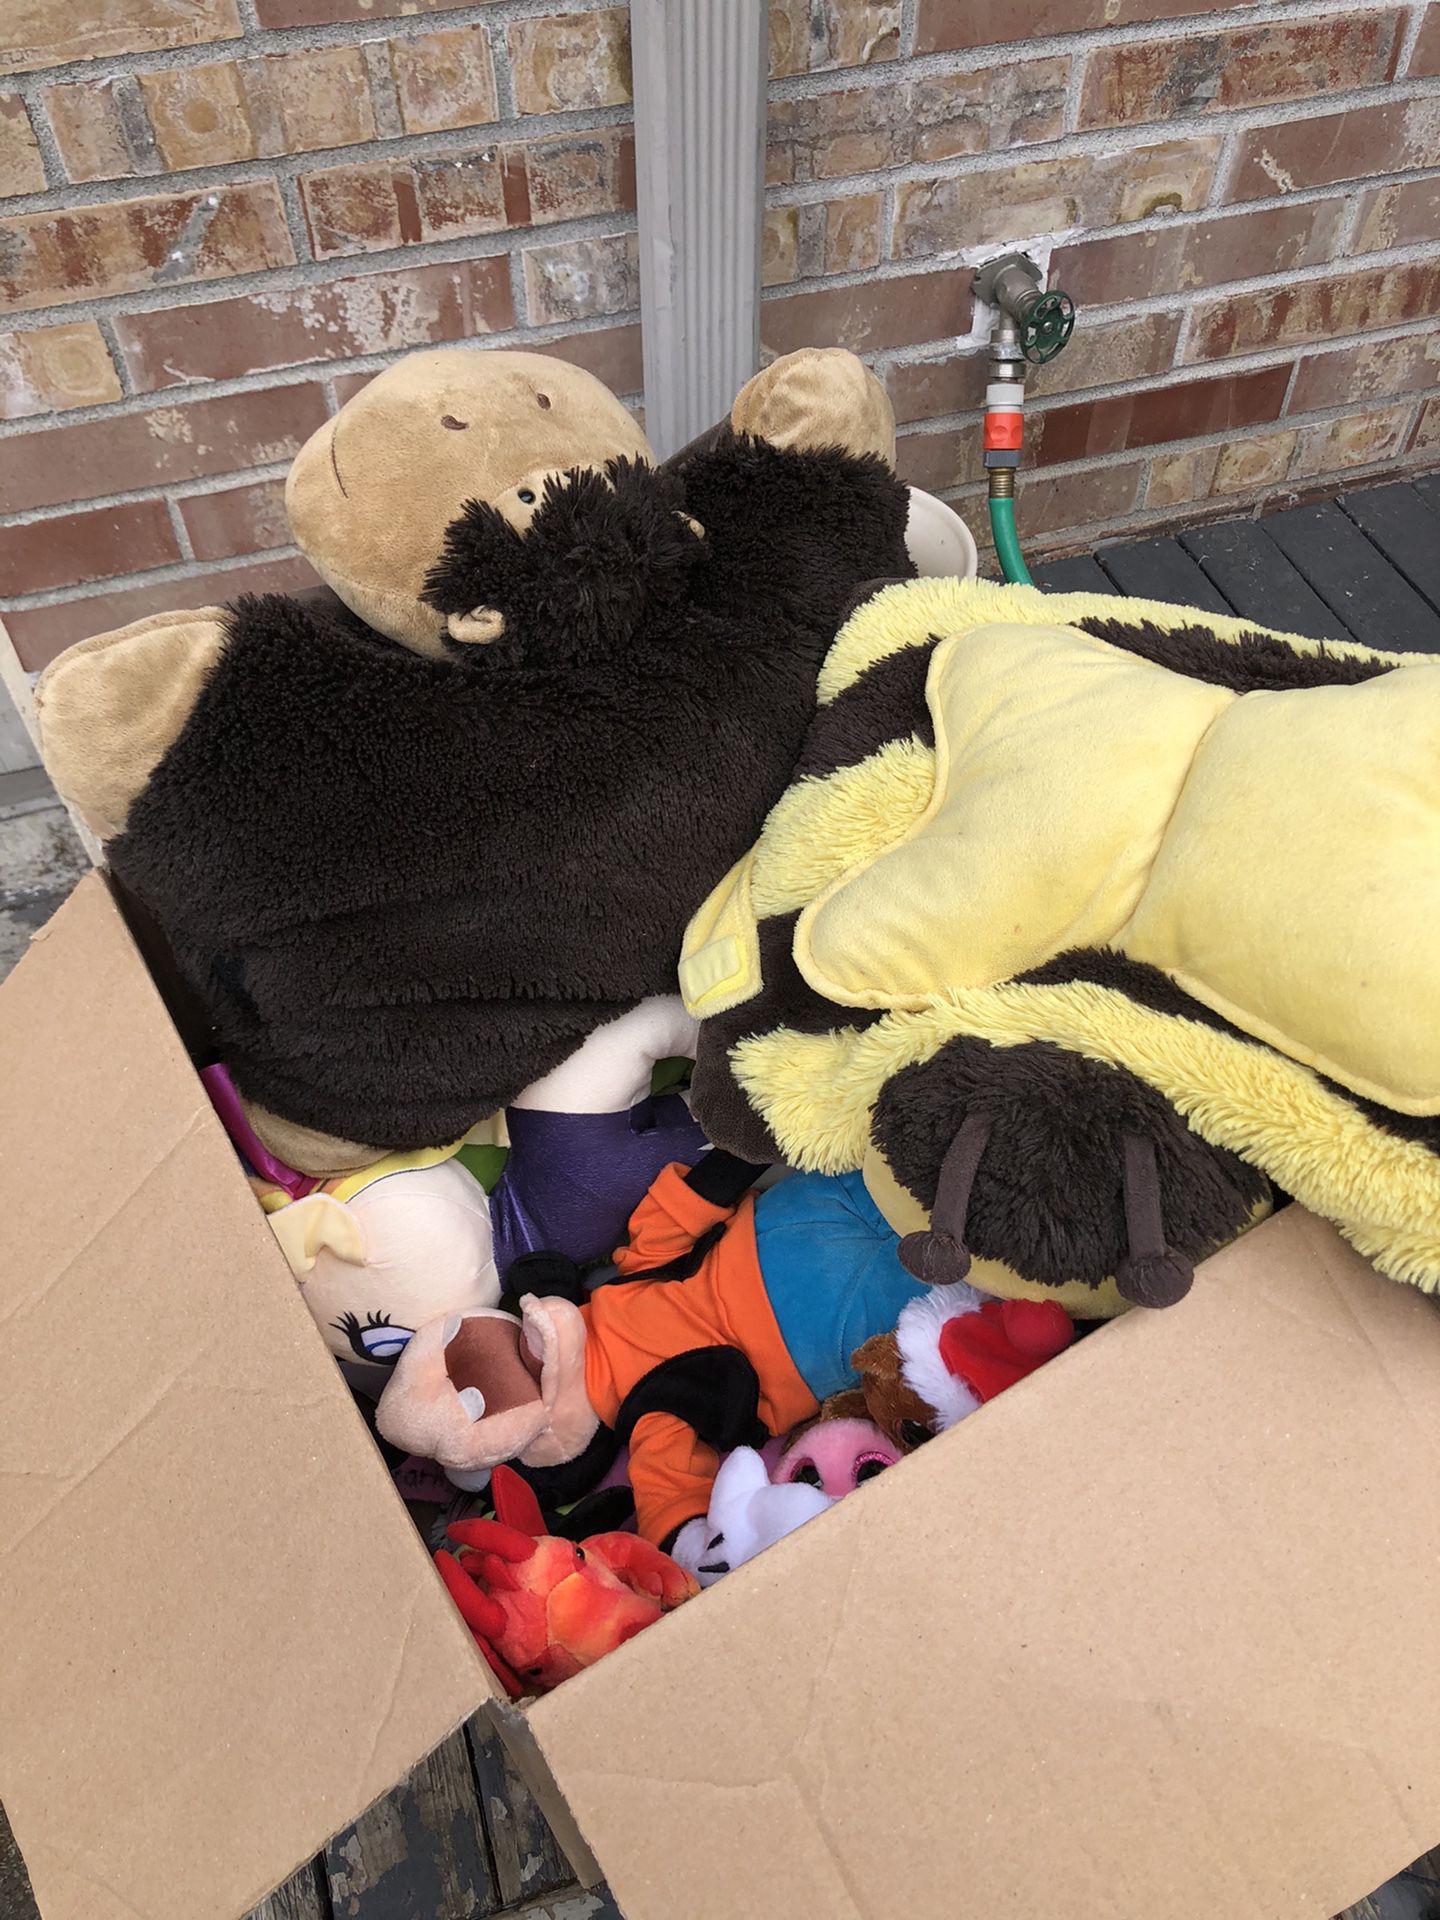 Free stuffed animals and few toys